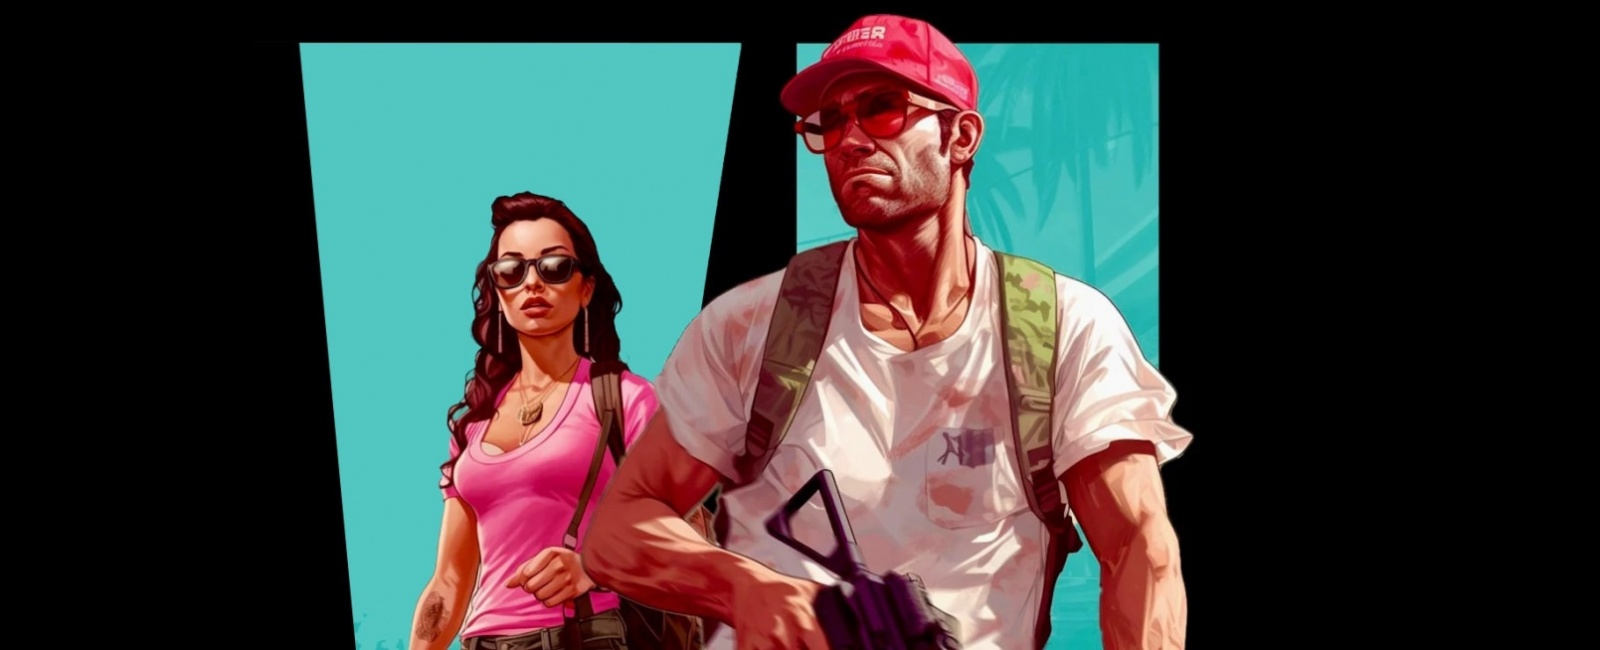 Rumor: GTA 6 Or Bully 2 Will Be Announced At E3